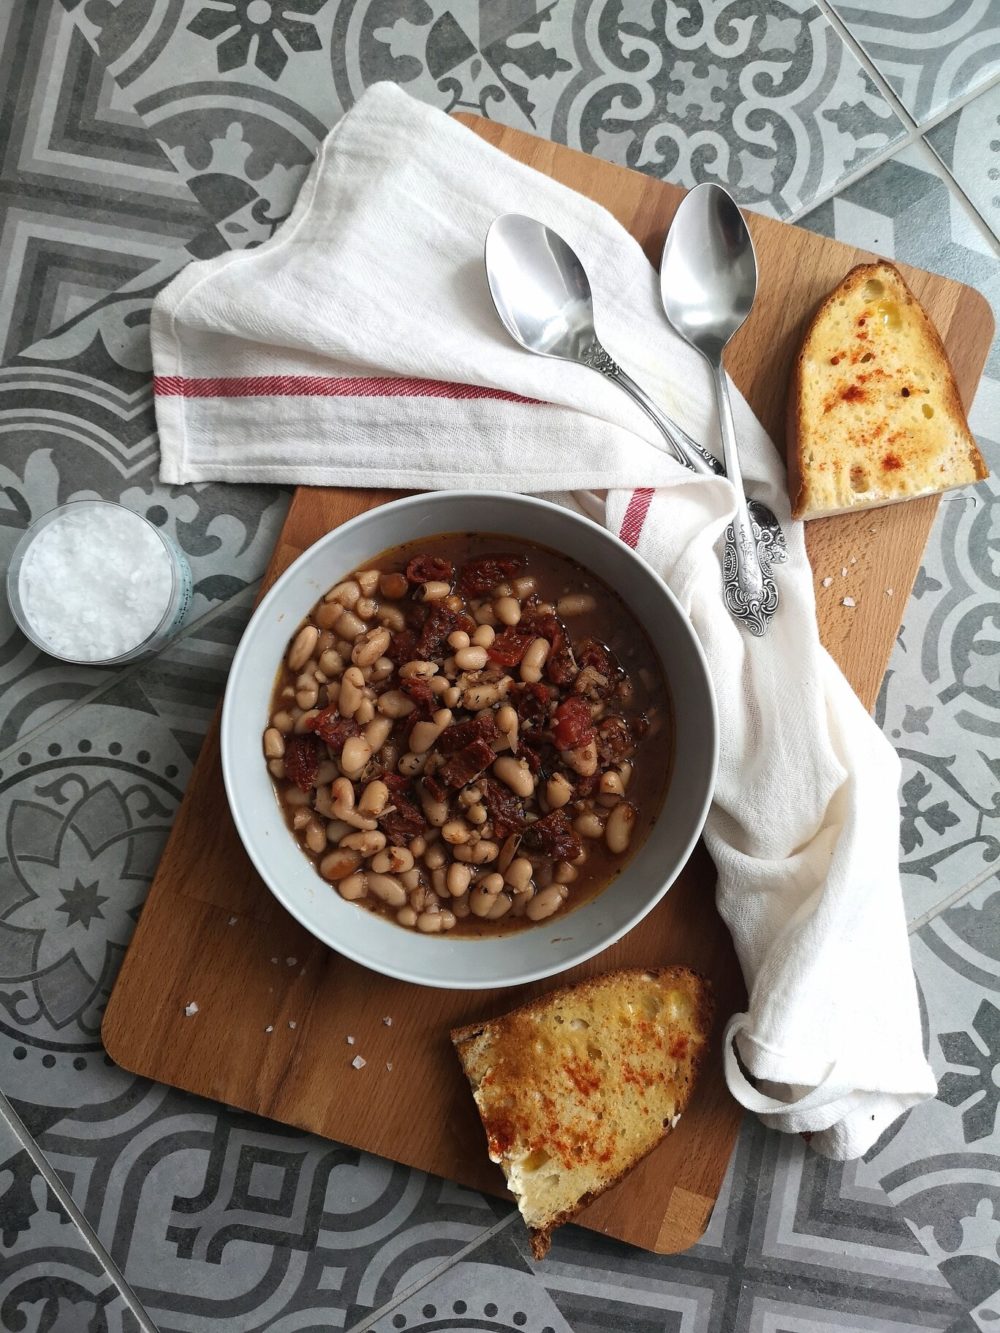 beans soup in a white dish on a table next to bread slices